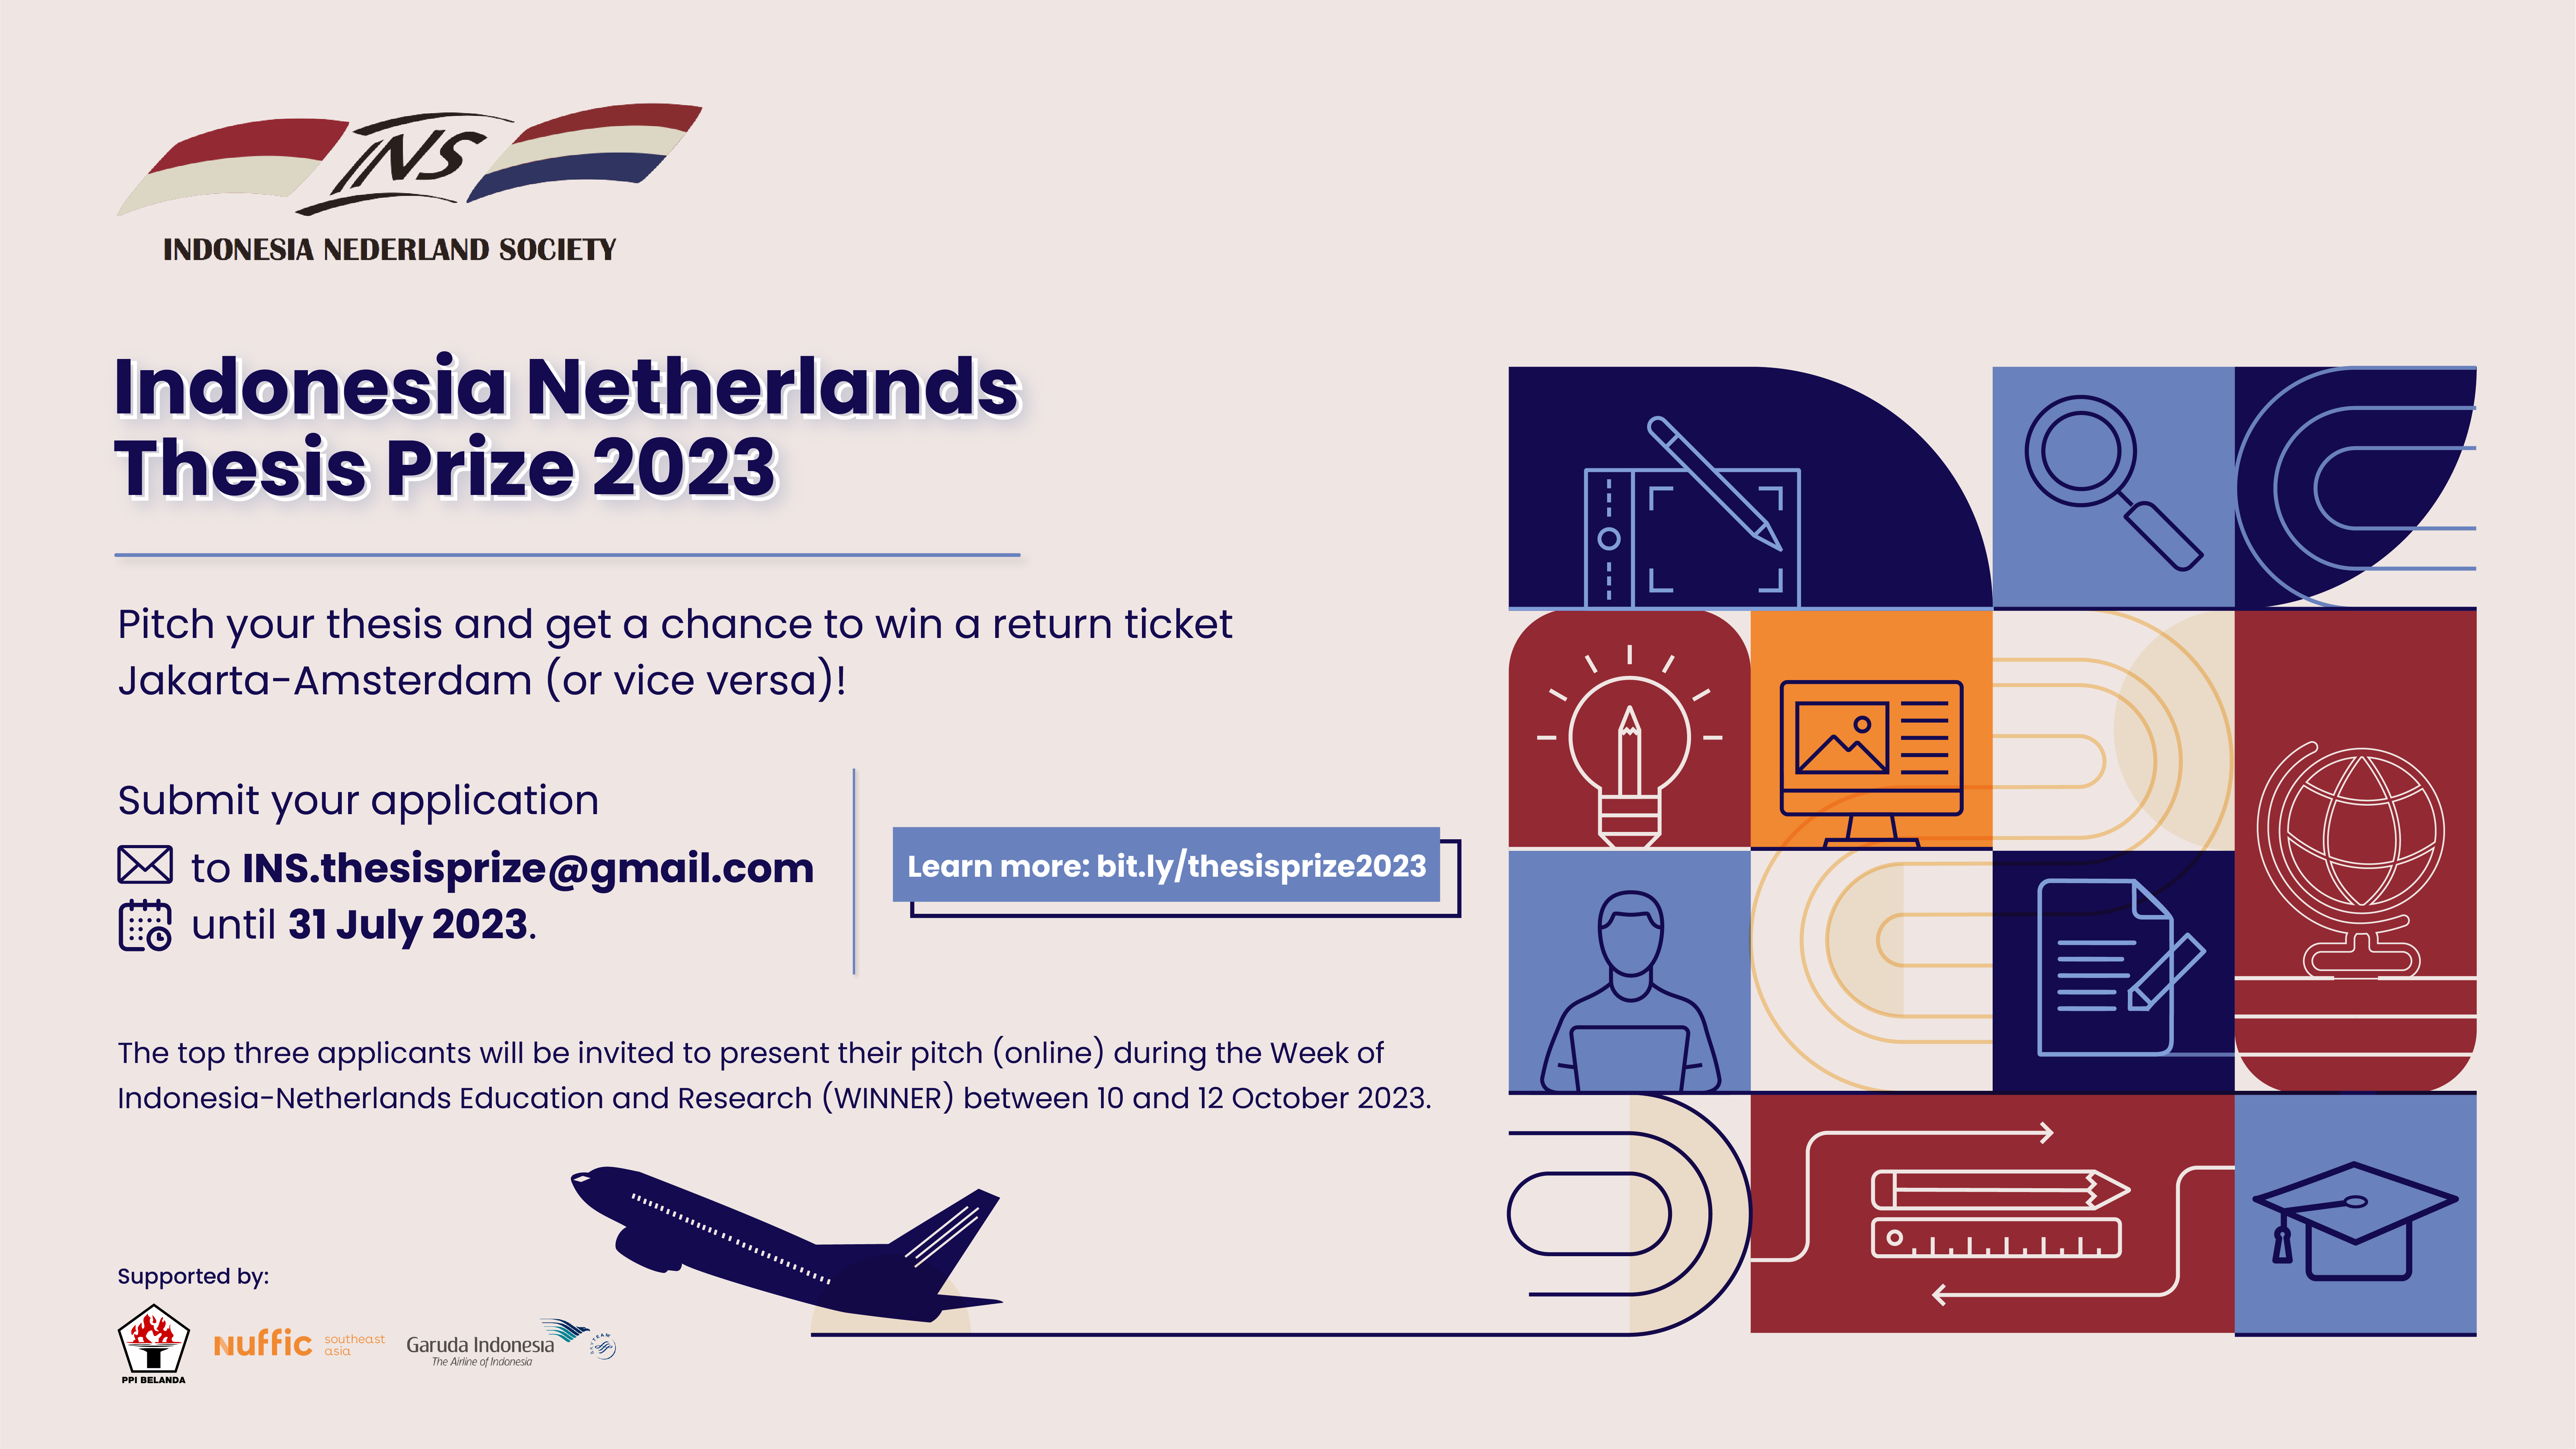 Indonesia Netherlands Thesis Prize 2023